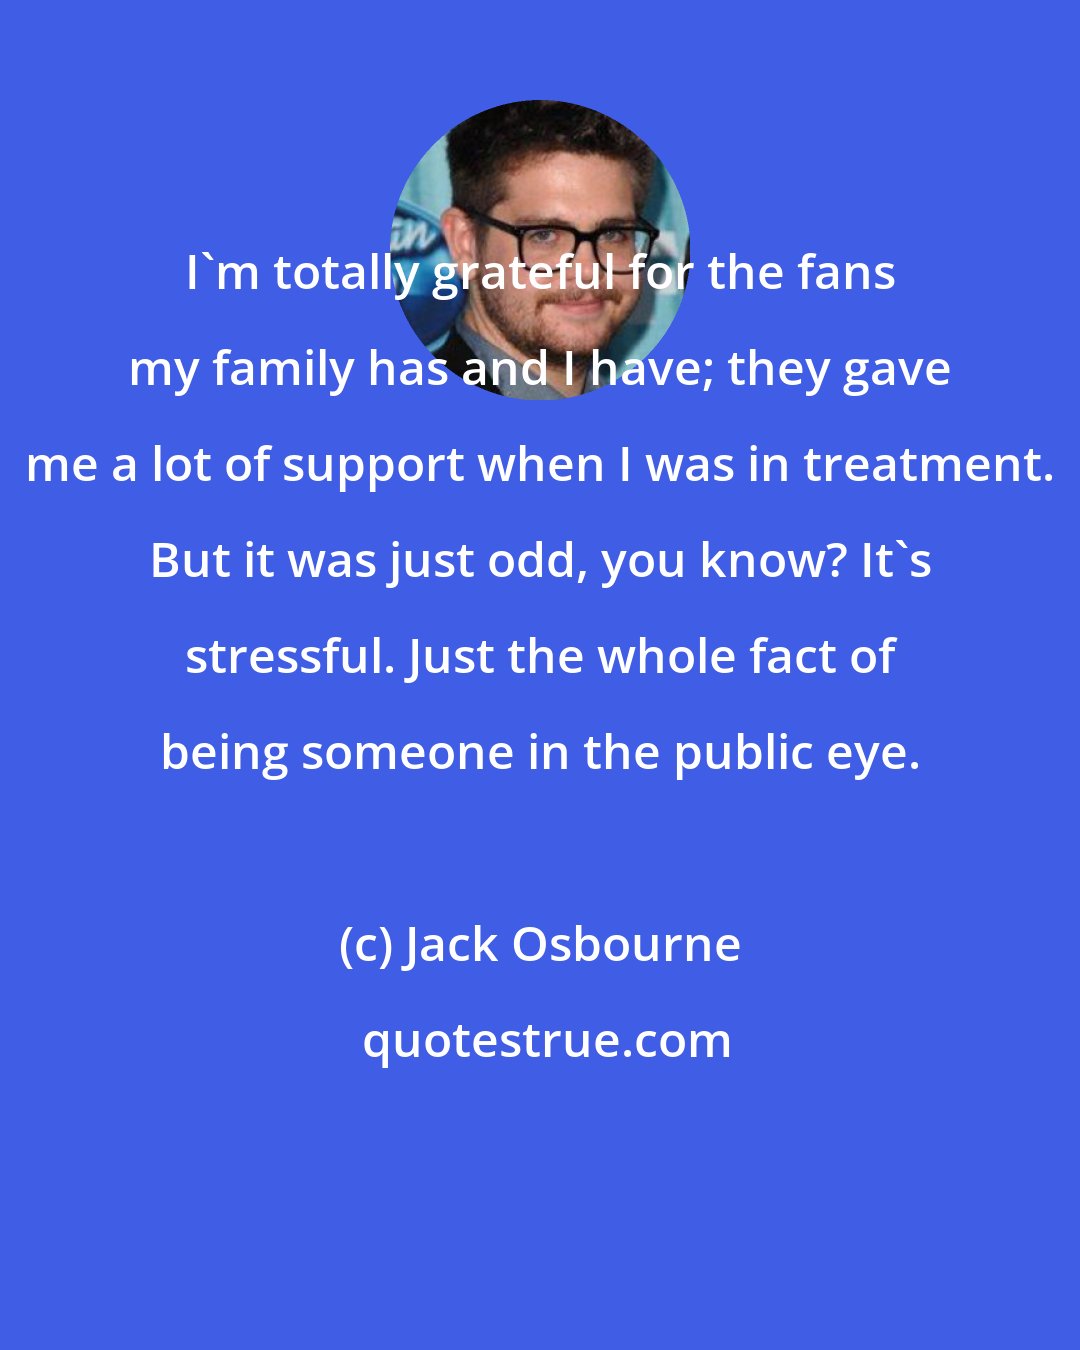 Jack Osbourne: I'm totally grateful for the fans my family has and I have; they gave me a lot of support when I was in treatment. But it was just odd, you know? It's stressful. Just the whole fact of being someone in the public eye.